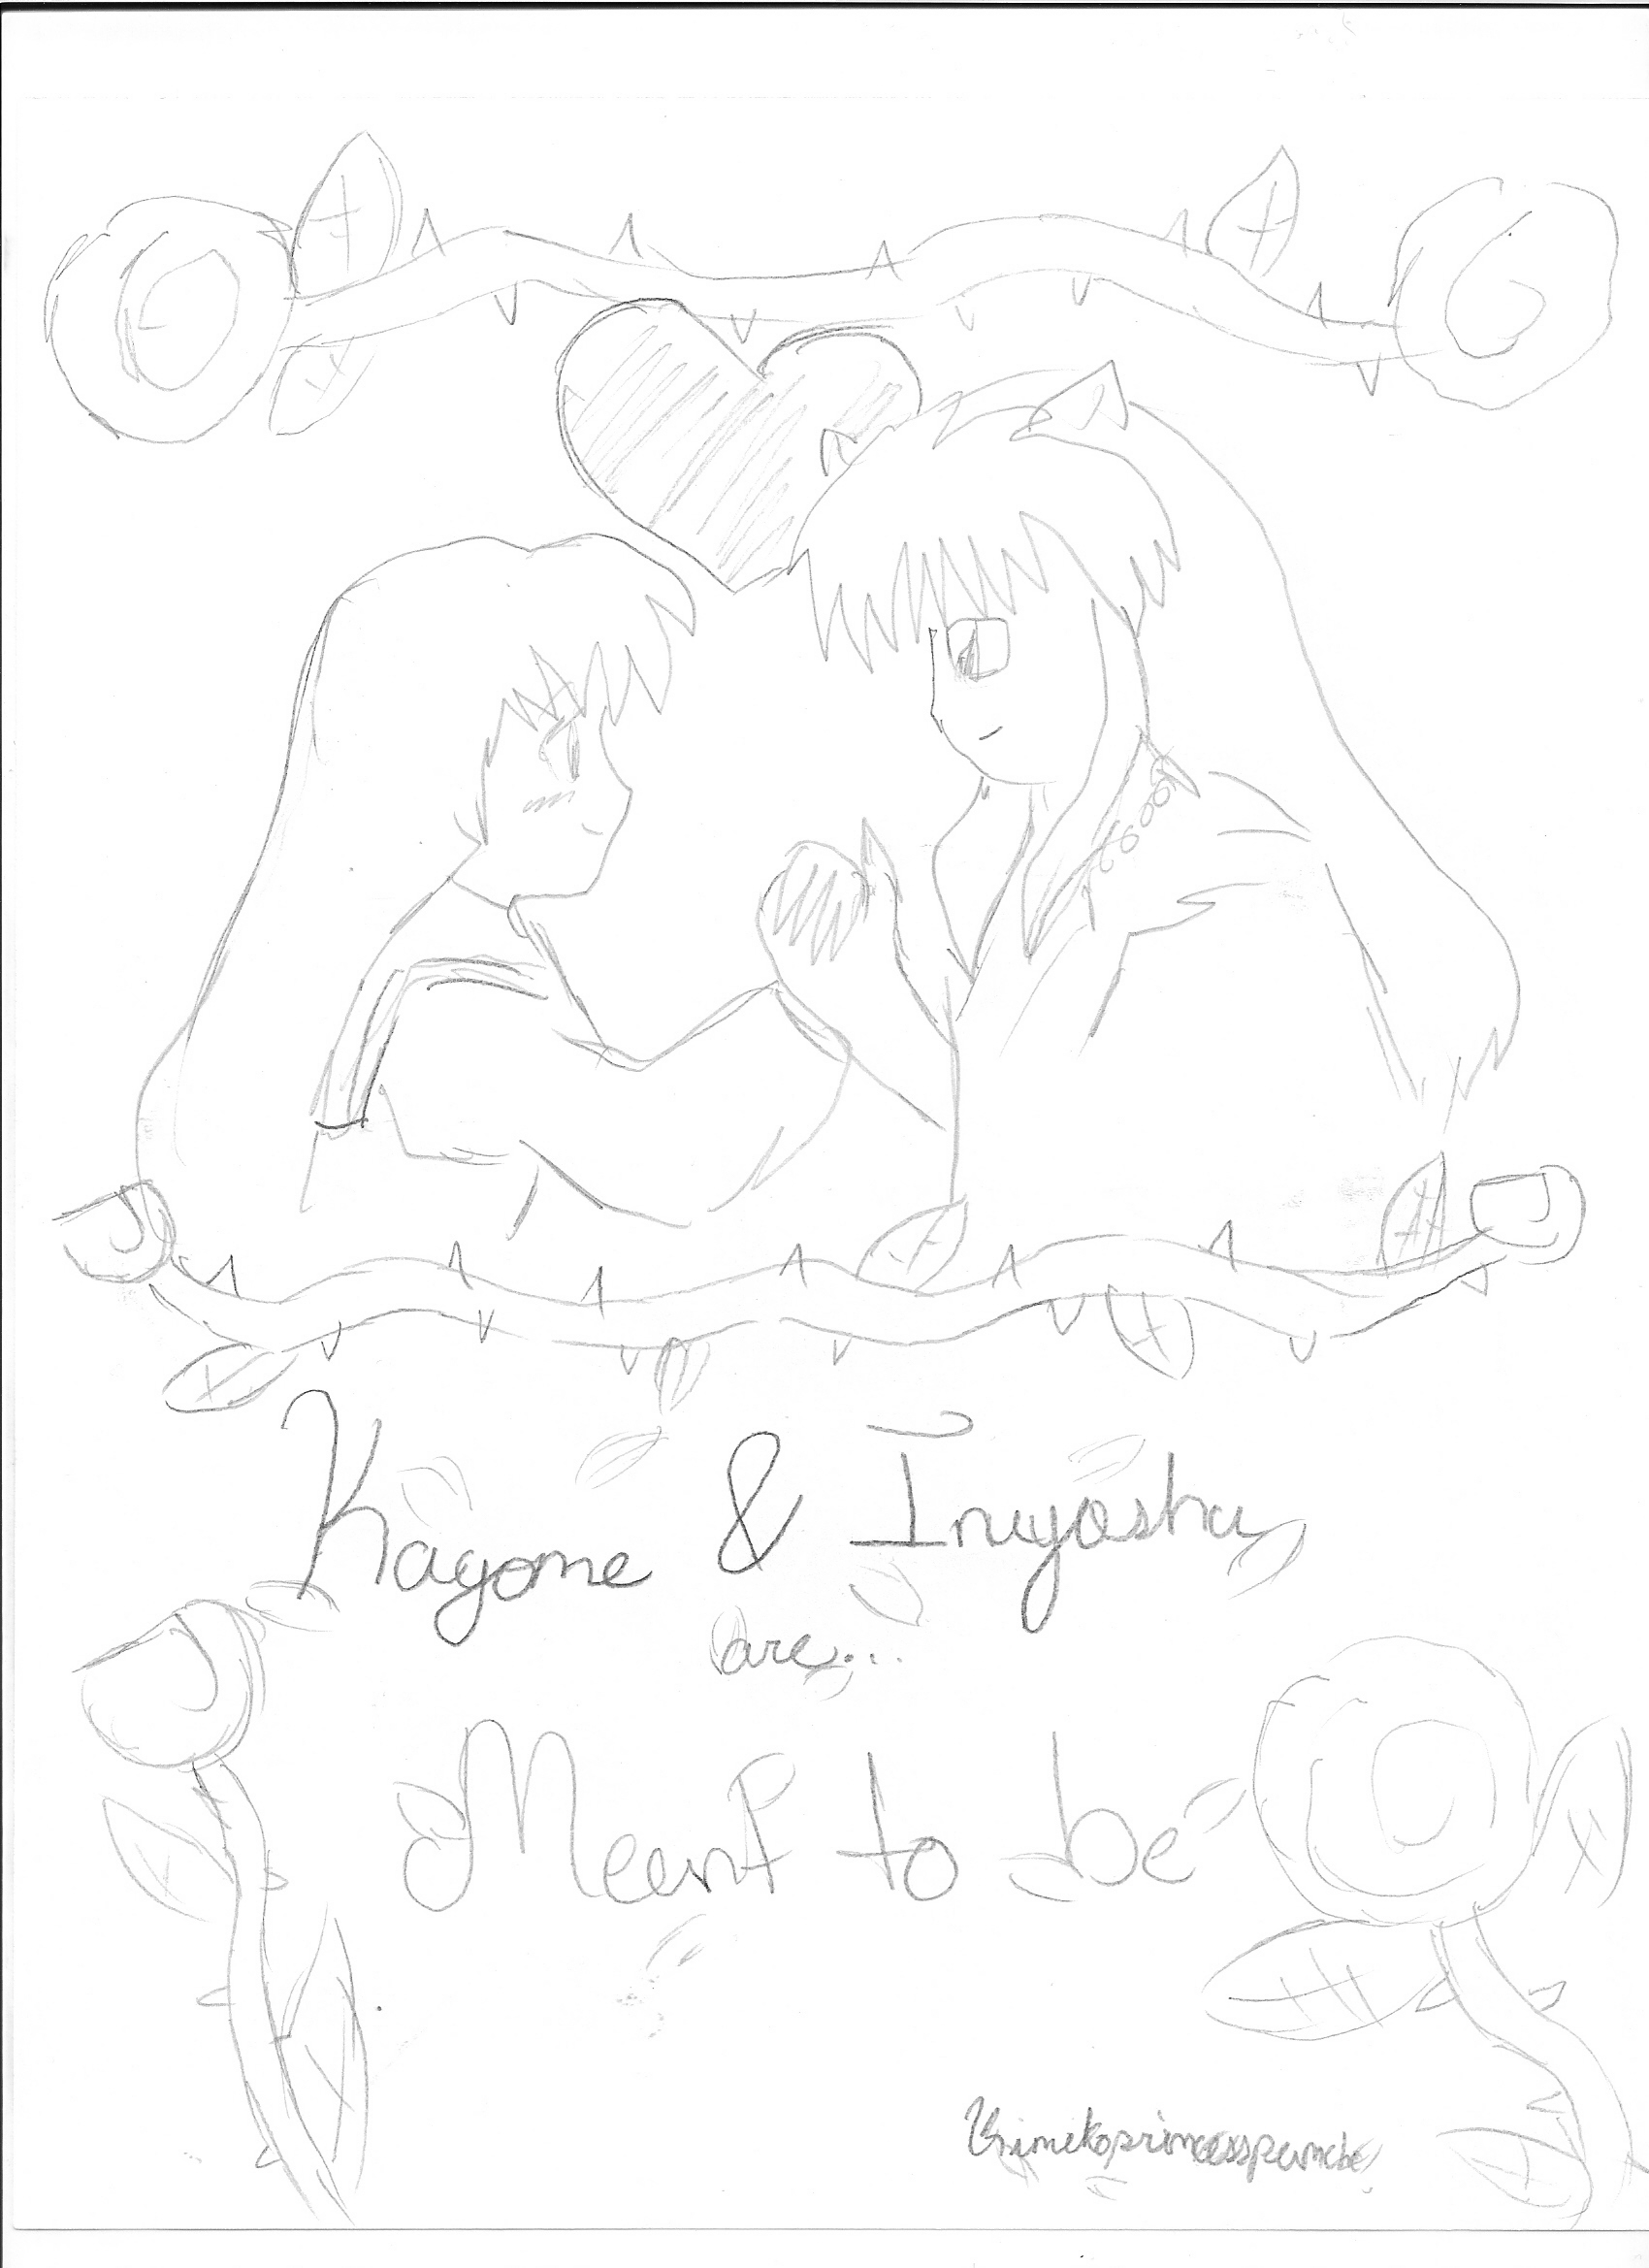 InuYasha and kagome are meant to be by Kimikoprincesspancho